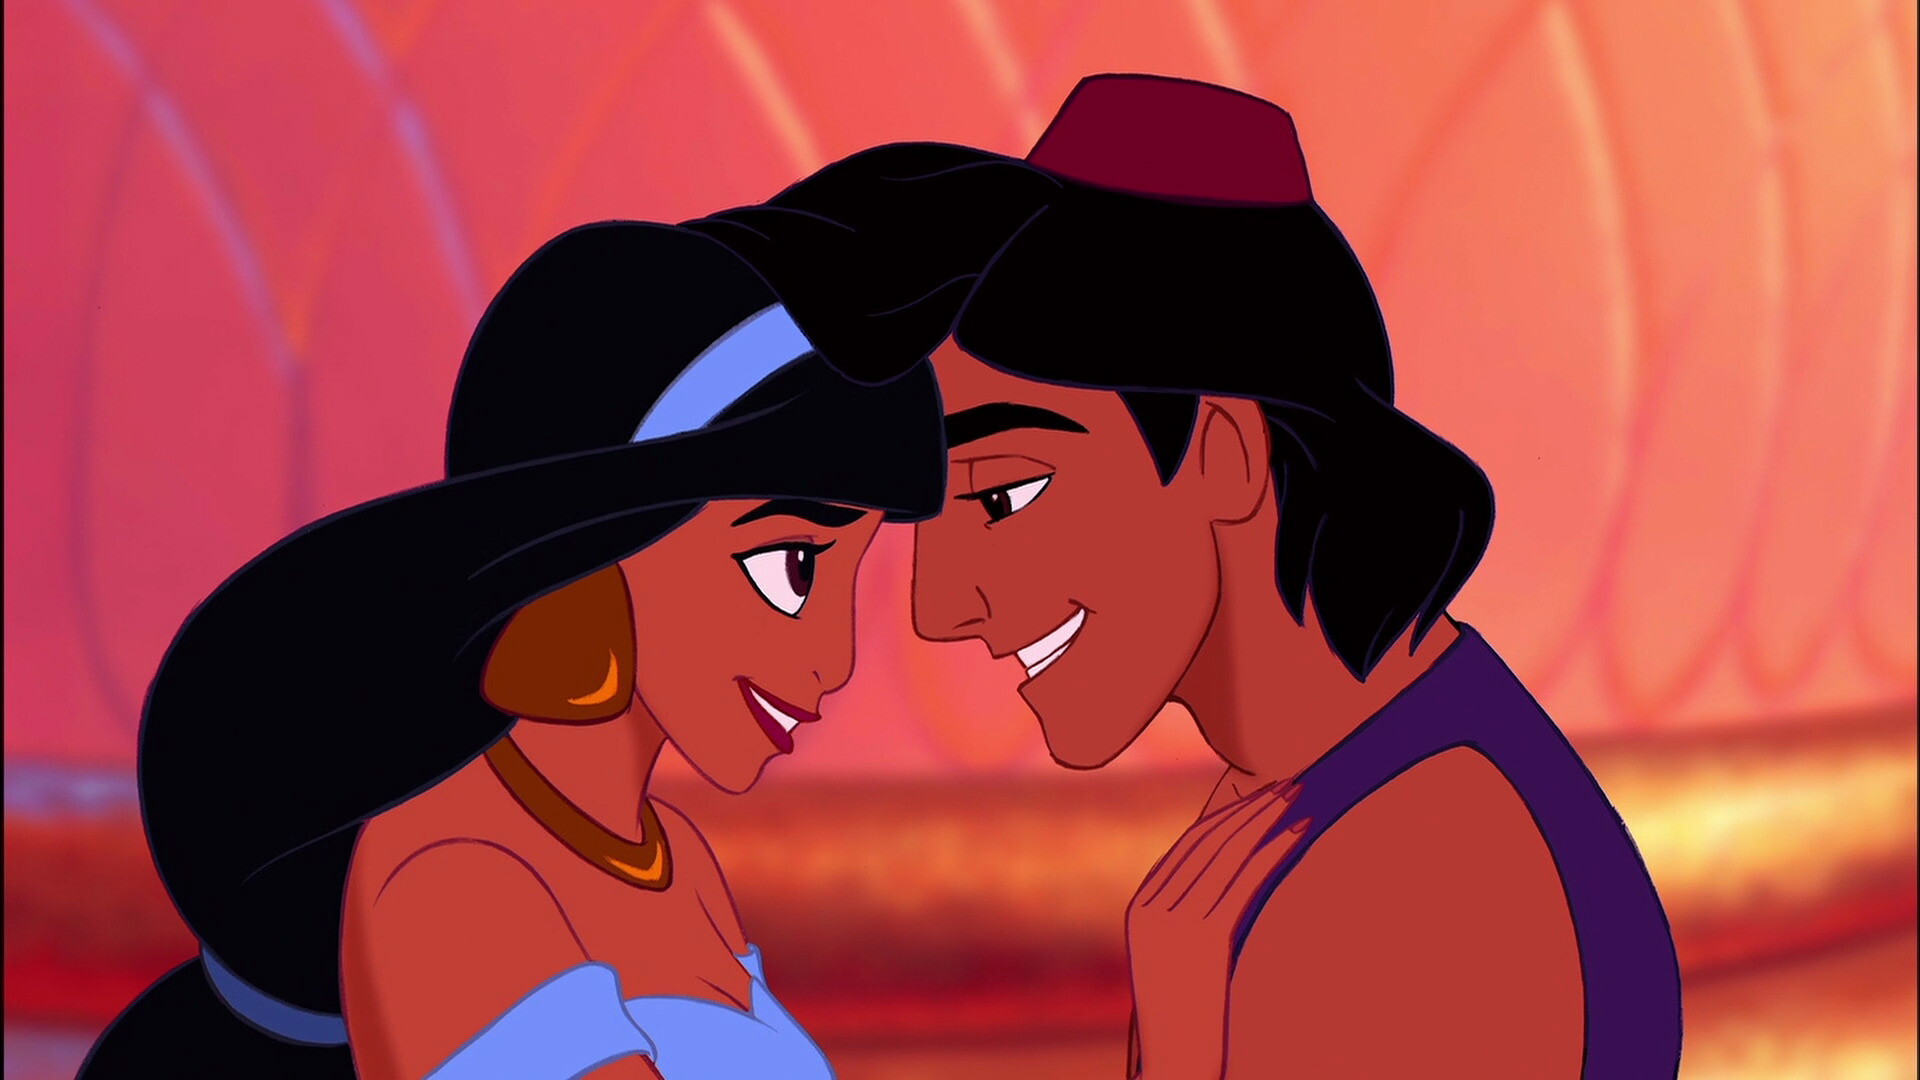 Aladdin (Cartoon): Taking place in the fictional Arabian city of Agrabah, the title character, a Street Urchin, meets and falls in love with the Rebellious Princess Jasmine. 1920x1080 Full HD Wallpaper.